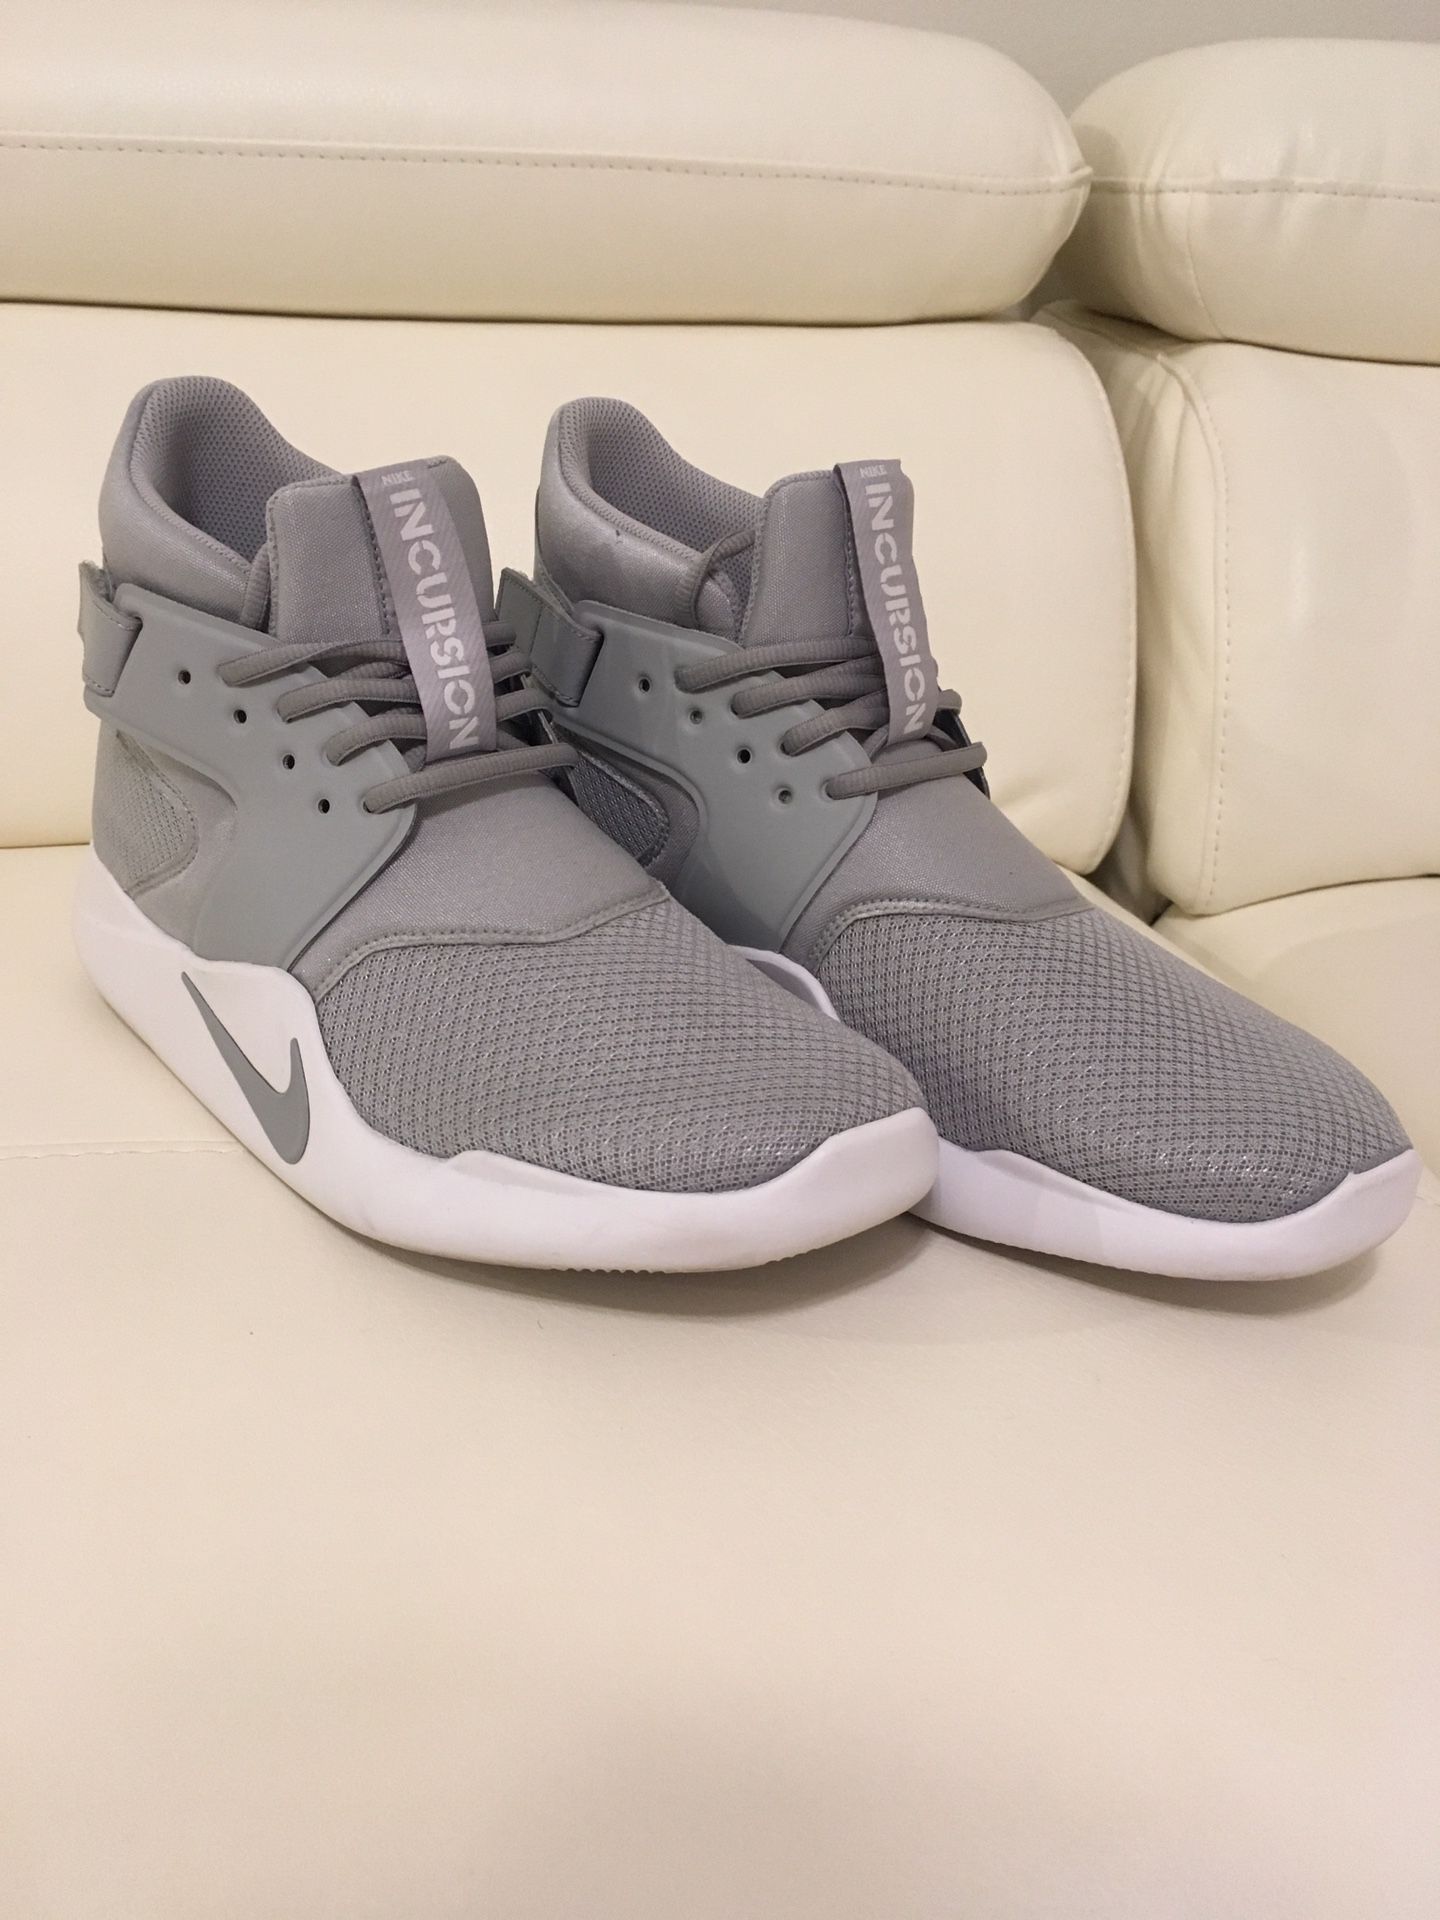 Nike Incursion Mid-Top Cool Grey Sz for Sale in Margate, FL -